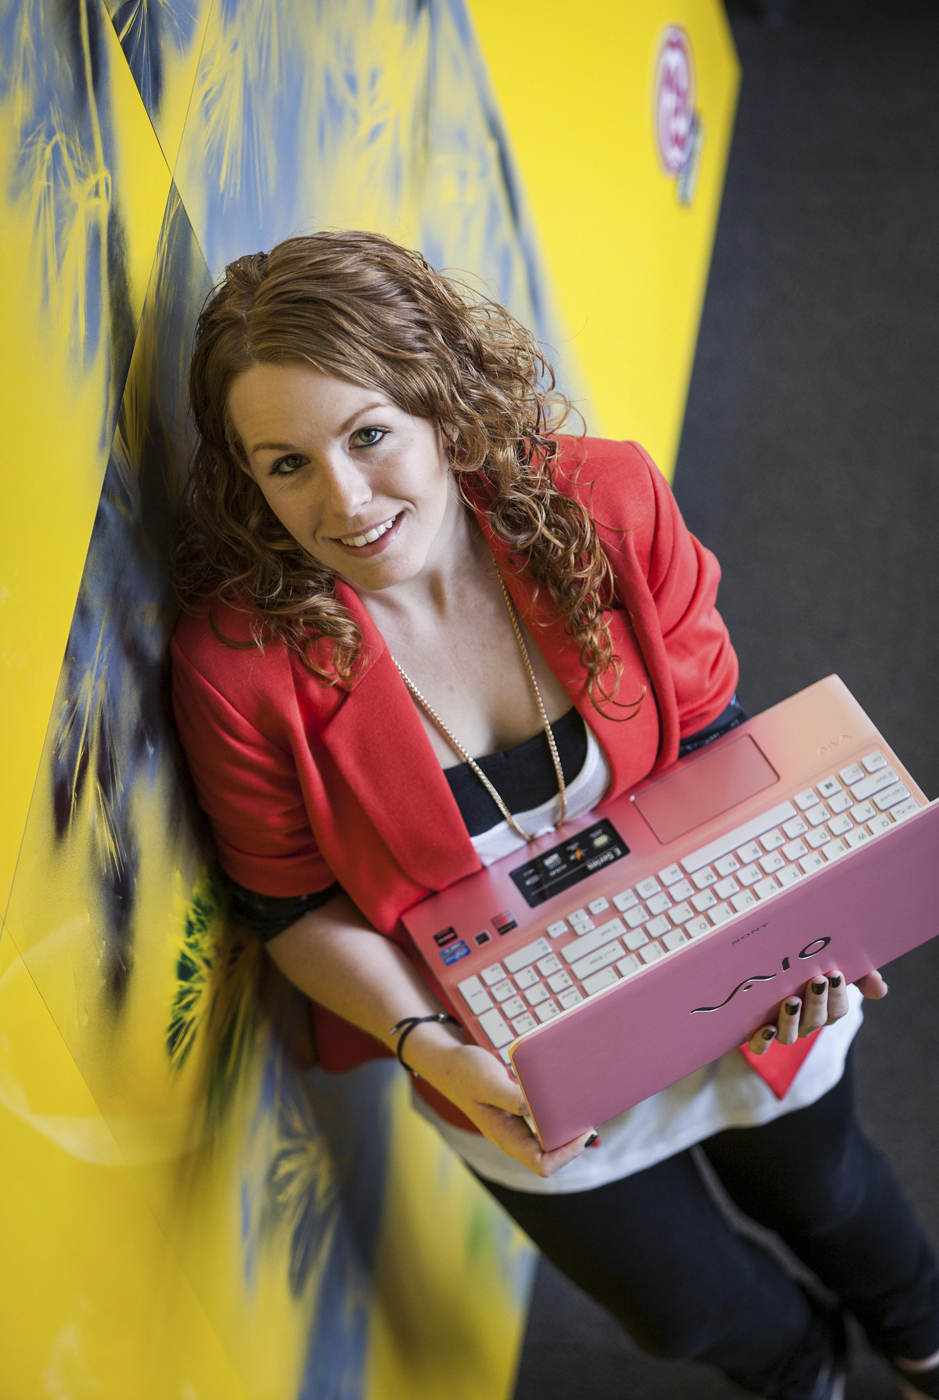 Carly Crossley holding laptop leans against wall